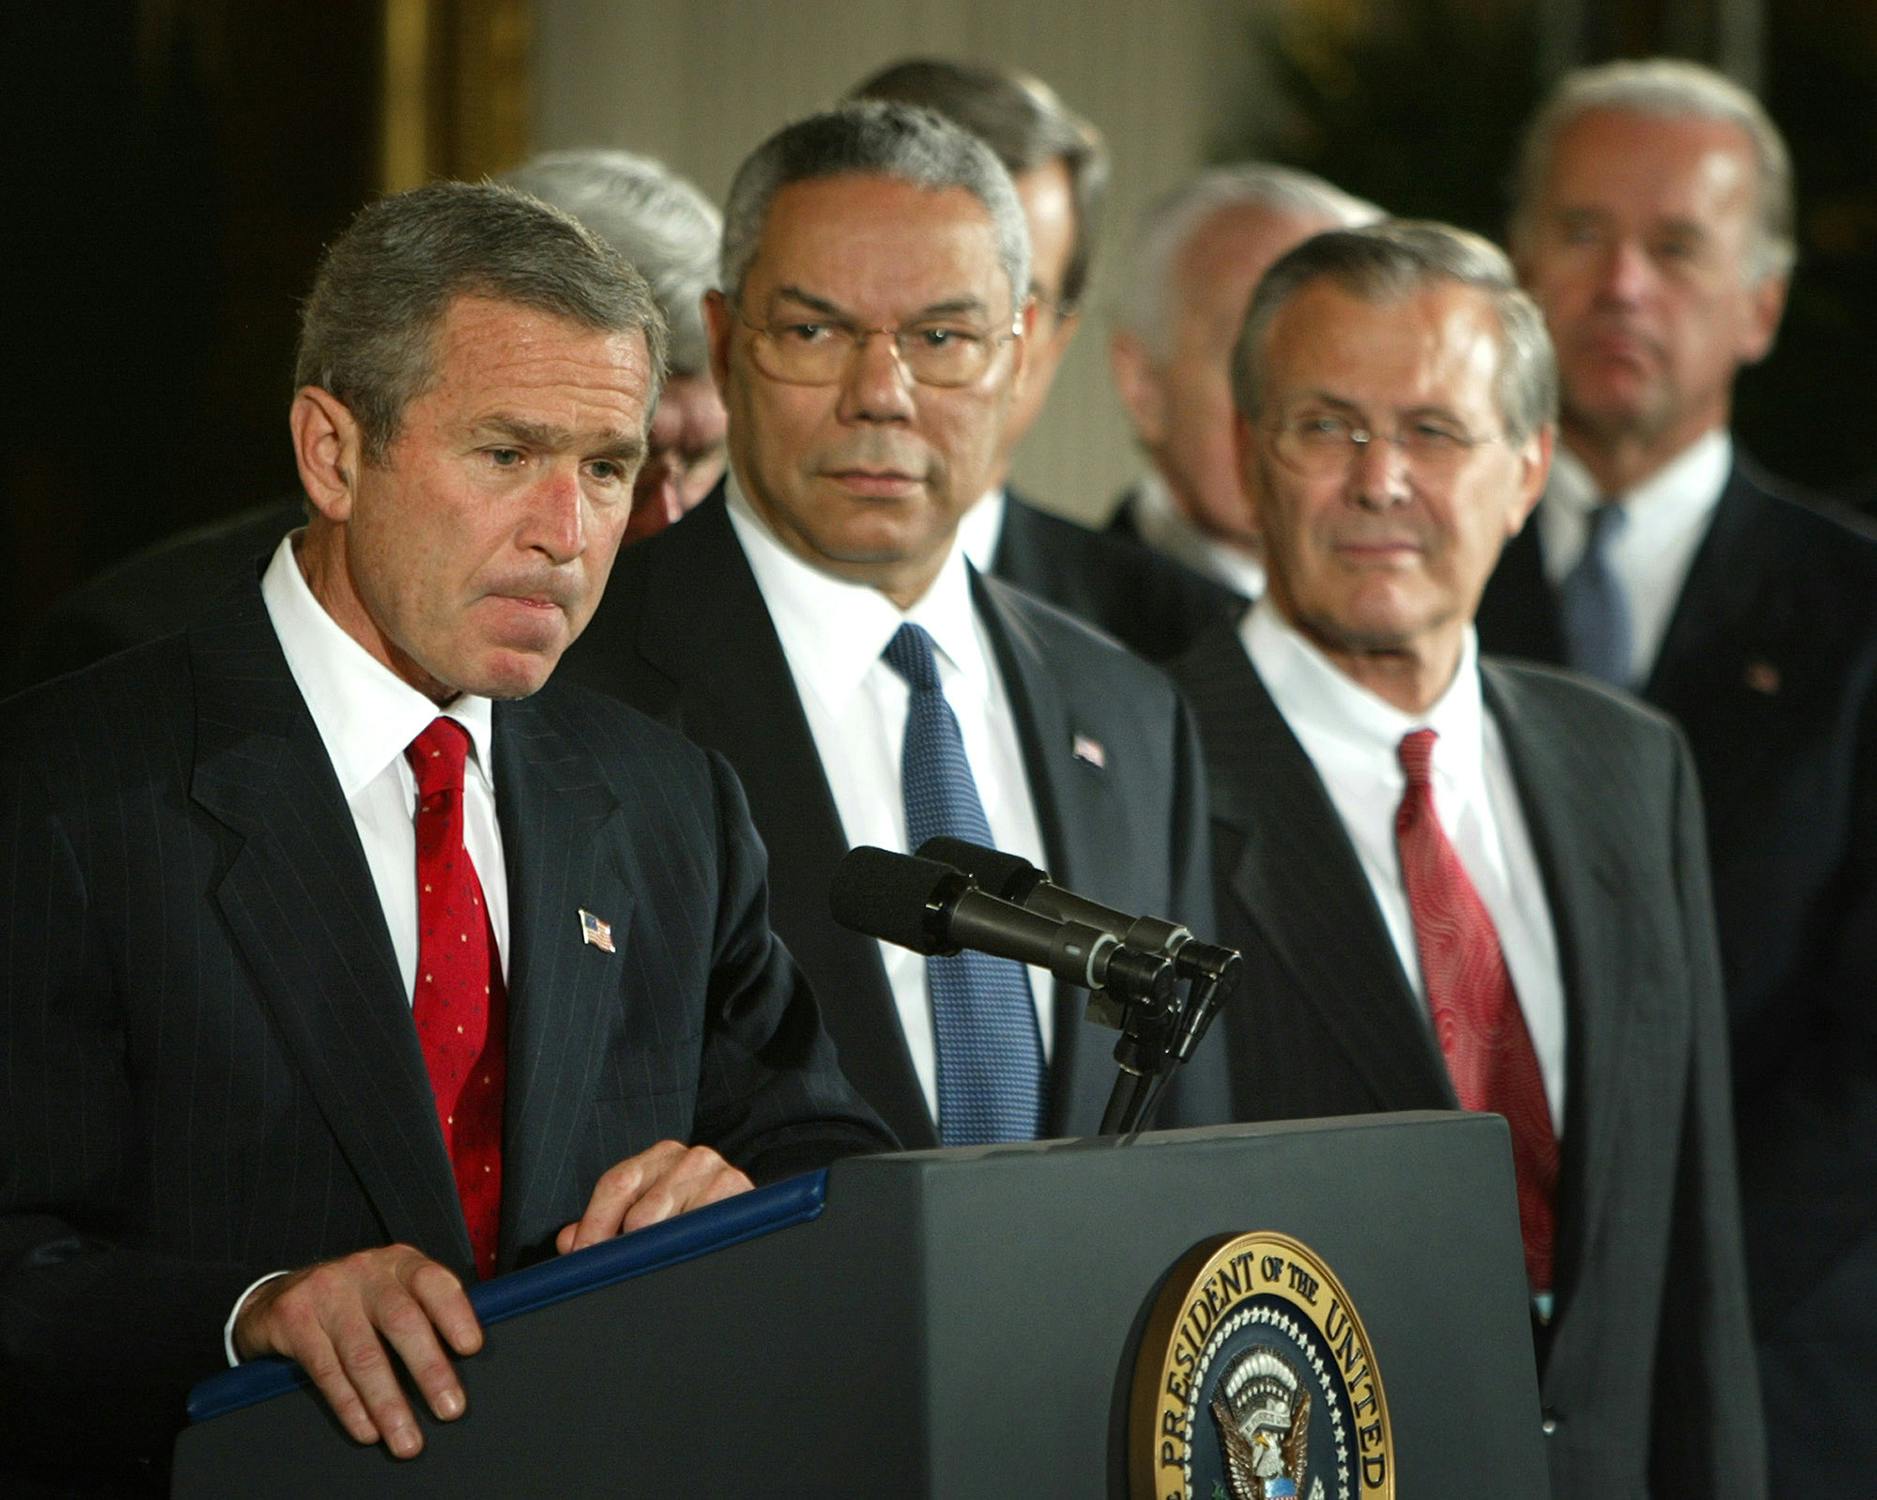 President Bush with Colin Powell and Donald Rumsfeld speak about authorizing the use of force against Iraq